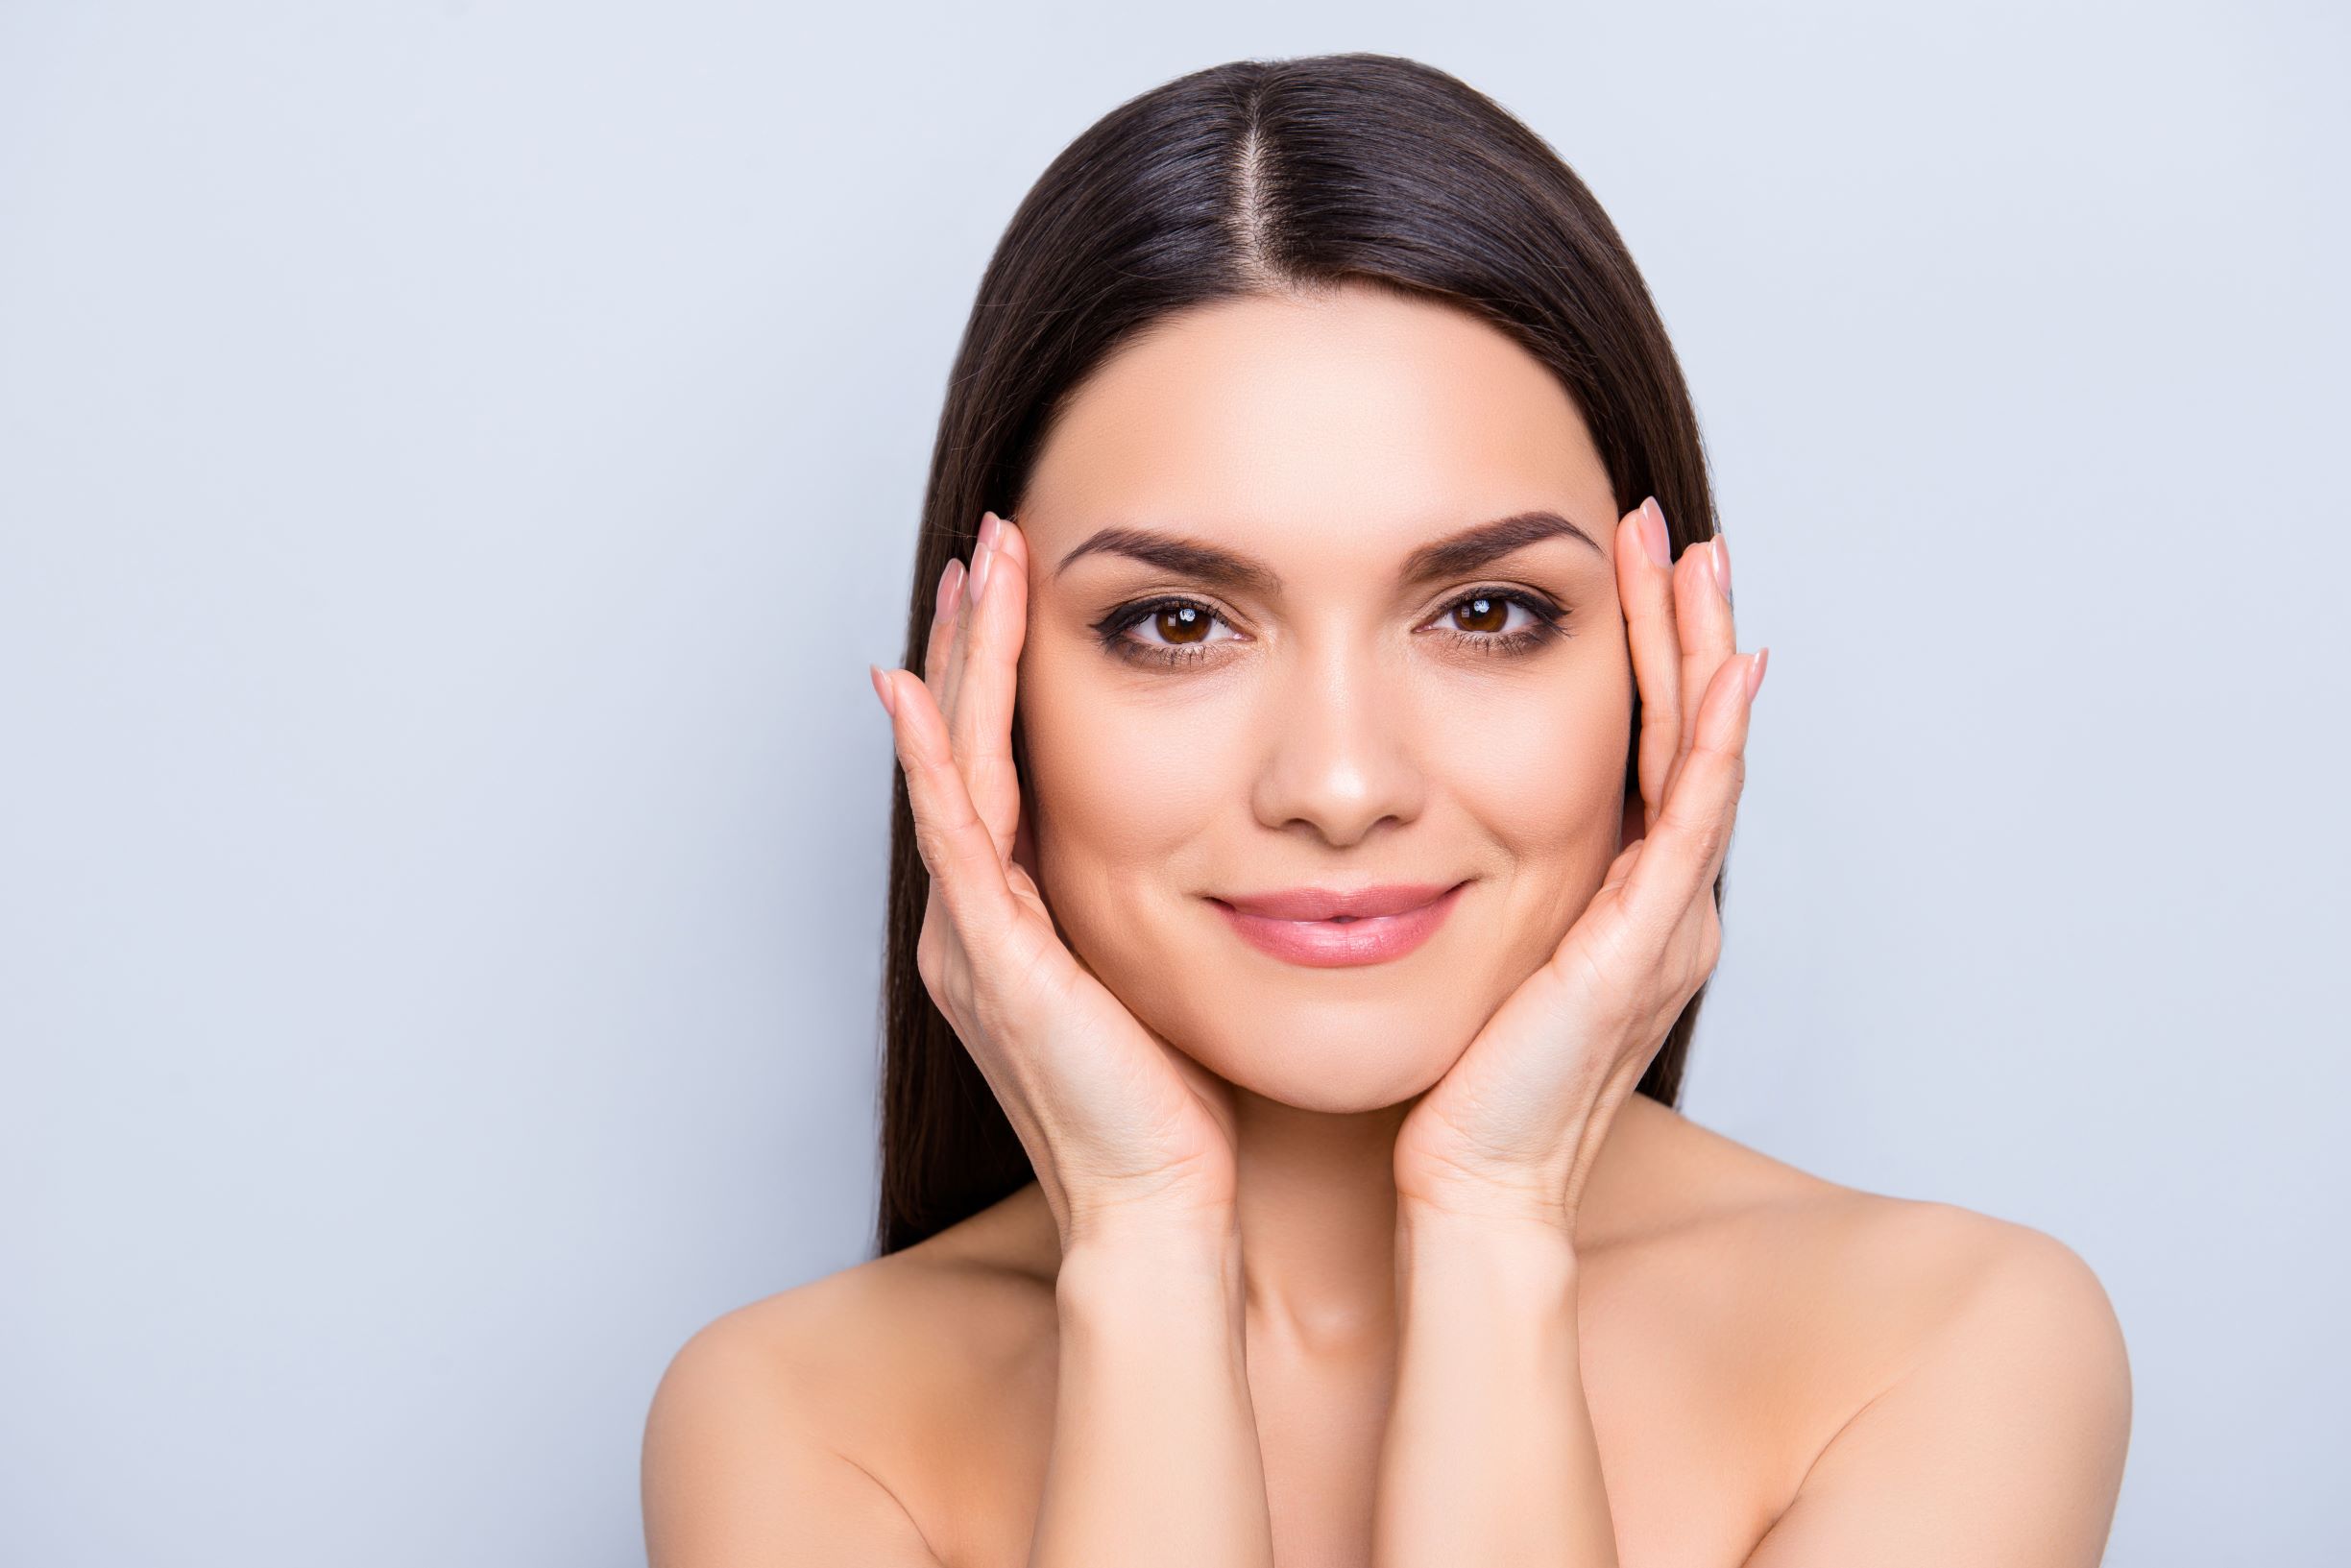 How to Get the Best Results from Your Facelift